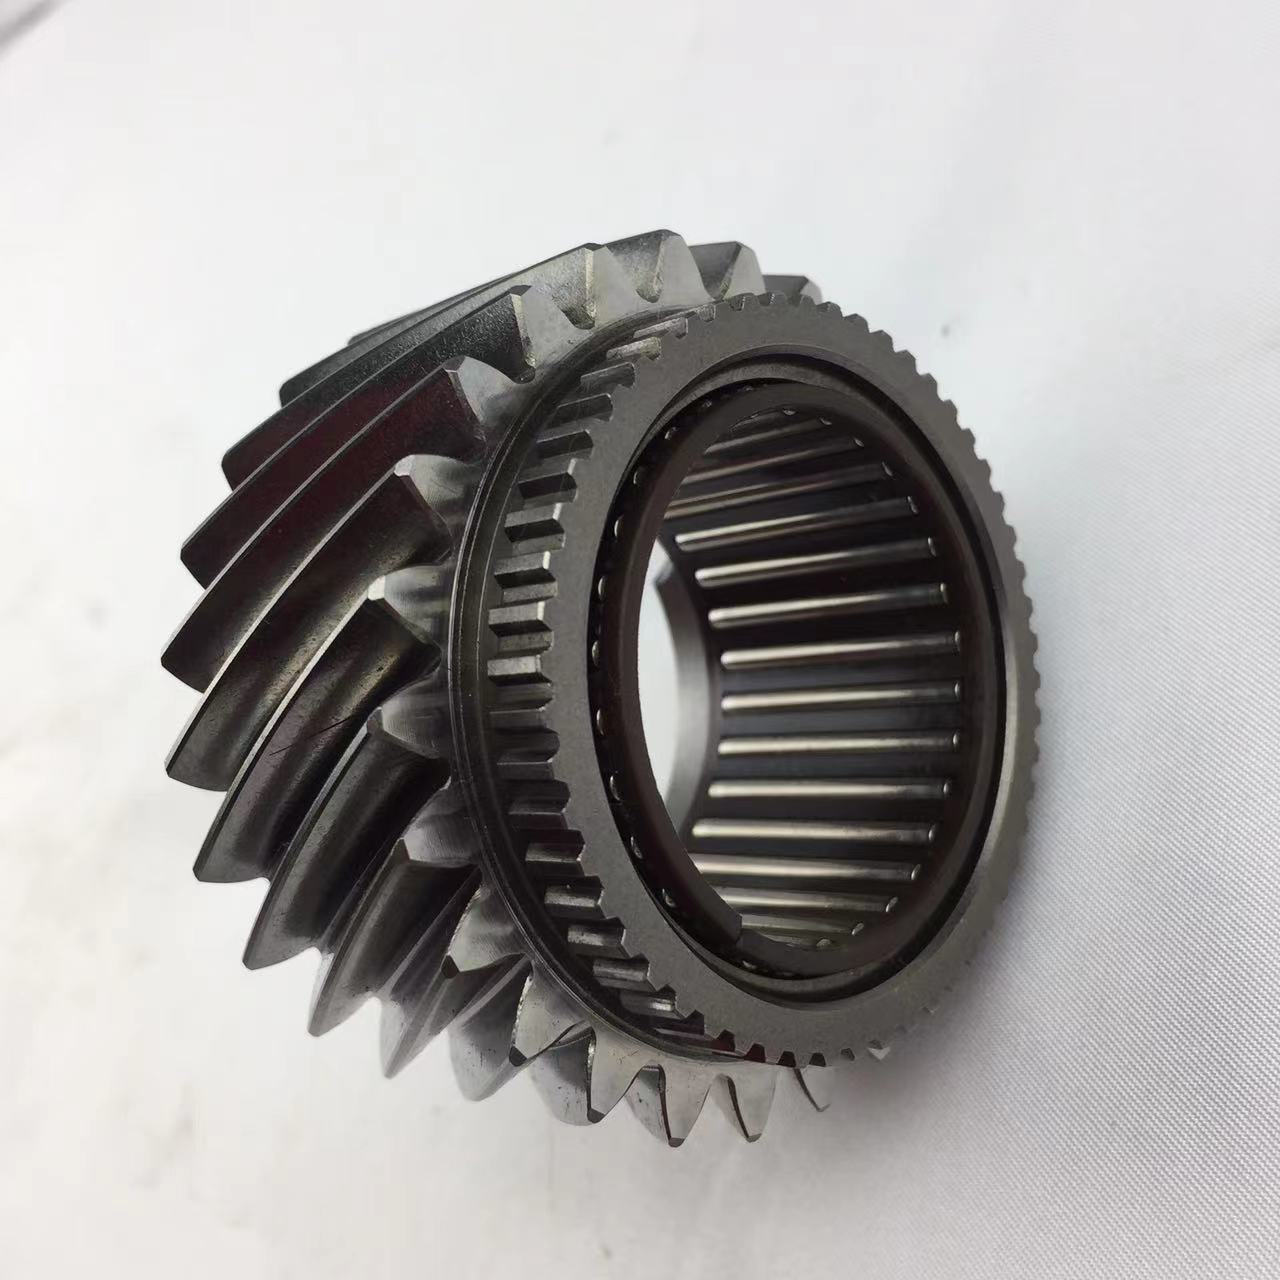 ZF 1335304044 Gear for 5S328 gearbox